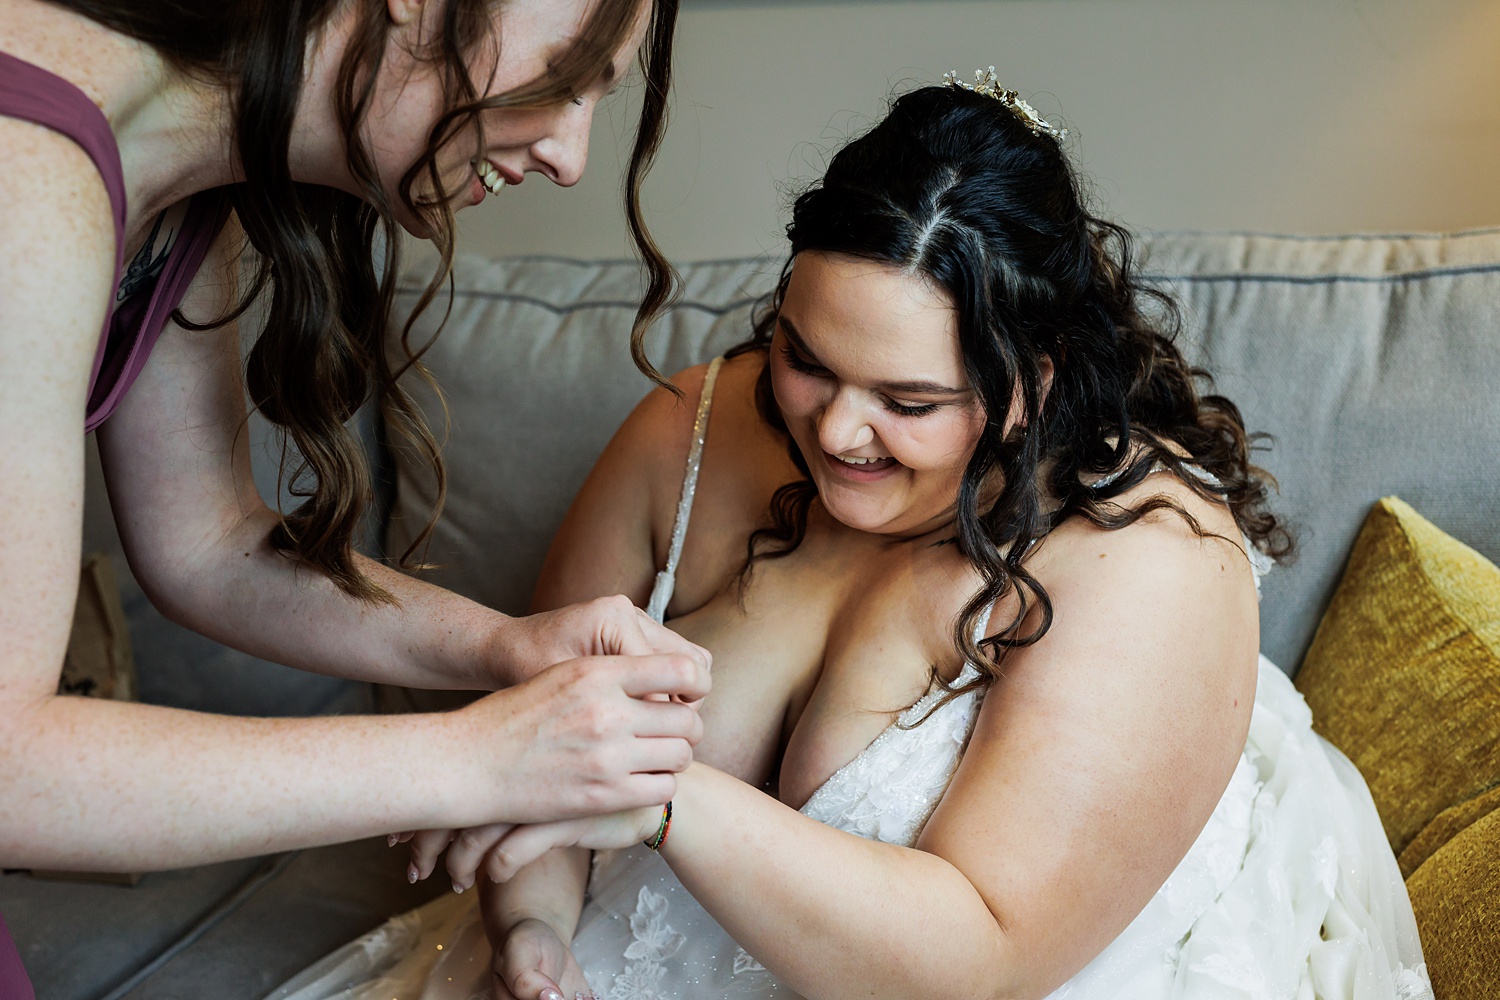 Maid of Honor helps the bride get a bracelet on from the groom